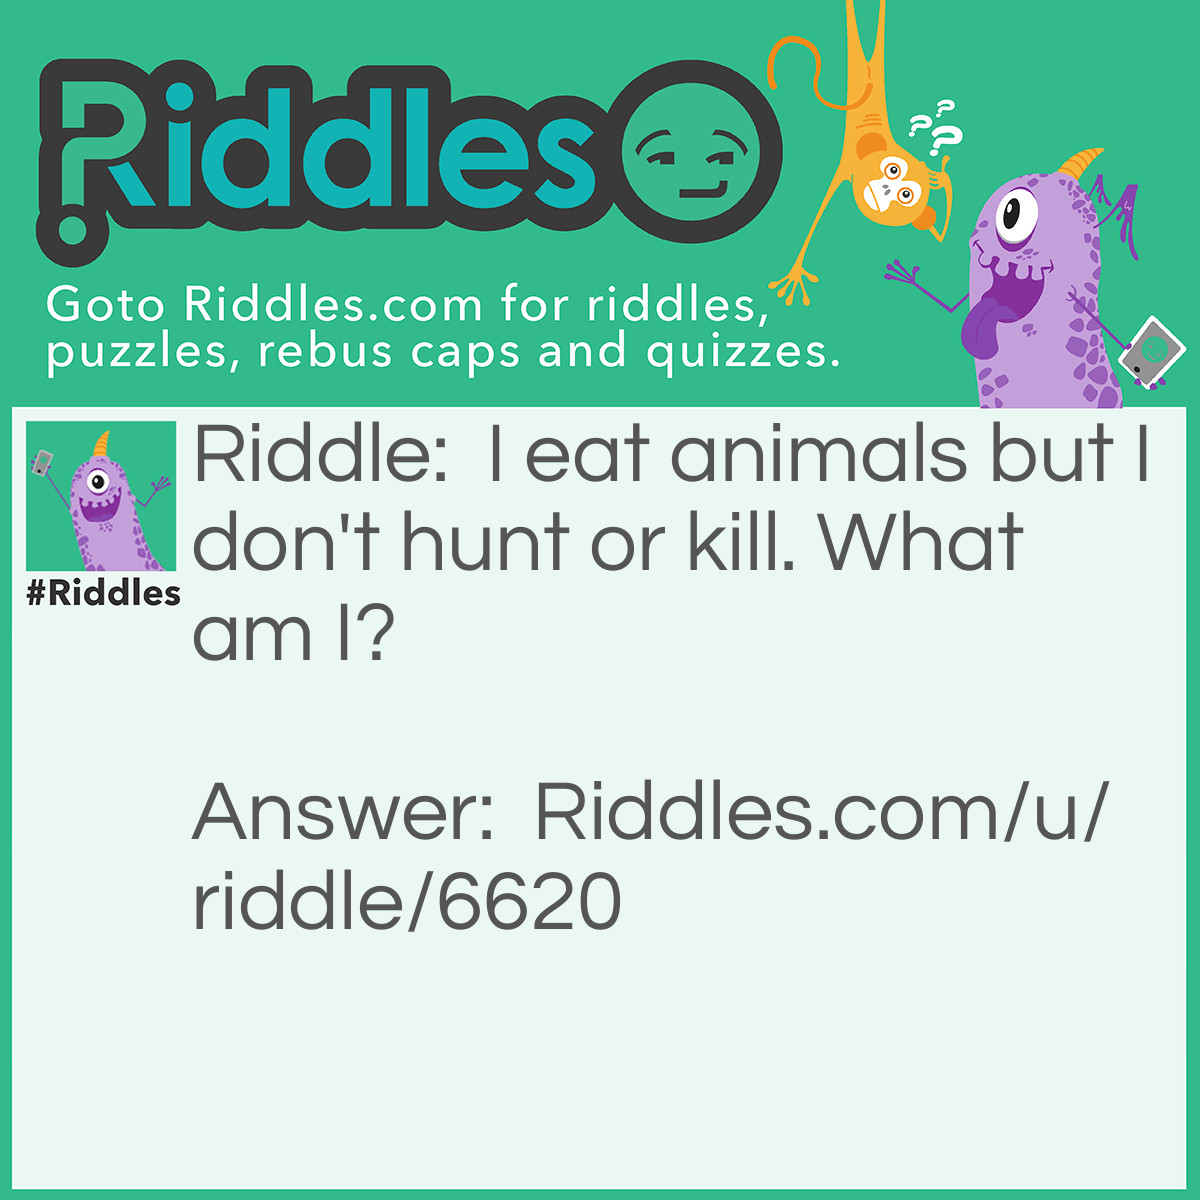 Riddle: I eat animals but I don't hunt or kill. What am I? Answer: A vulture.